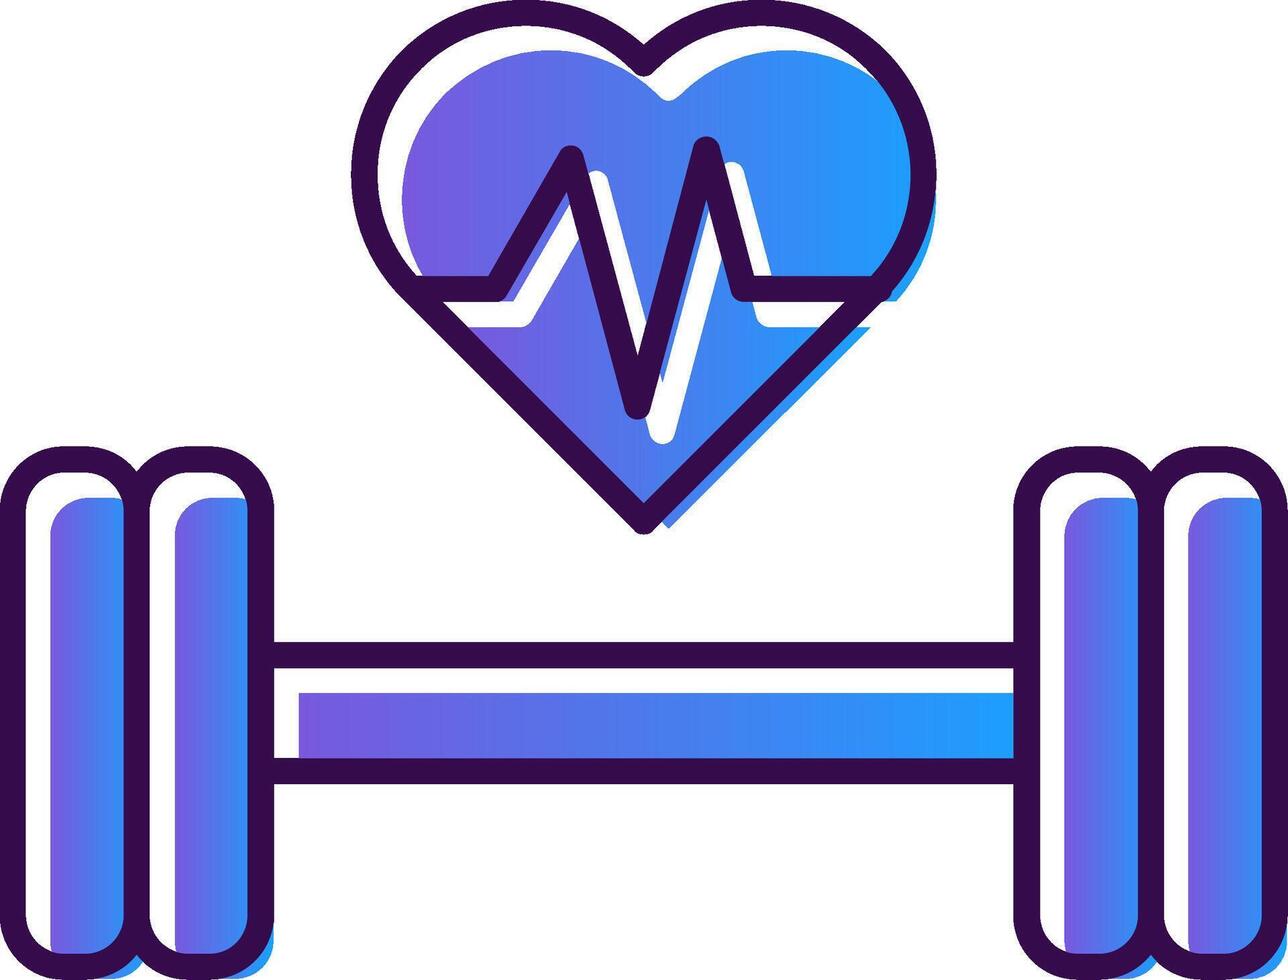 Gym Gradient Filled Icon vector